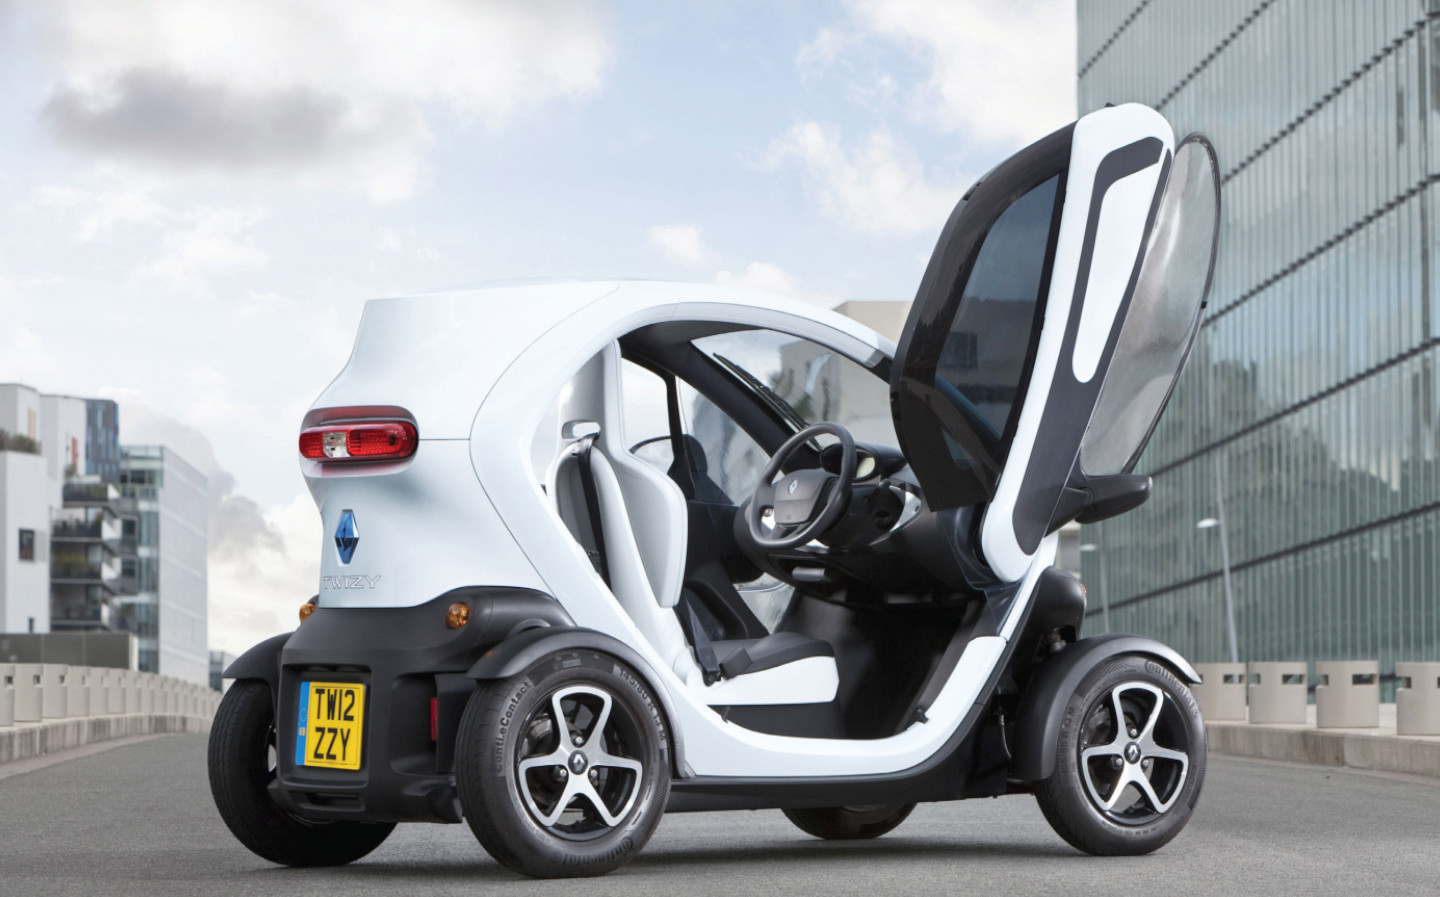 The Renault Twizy